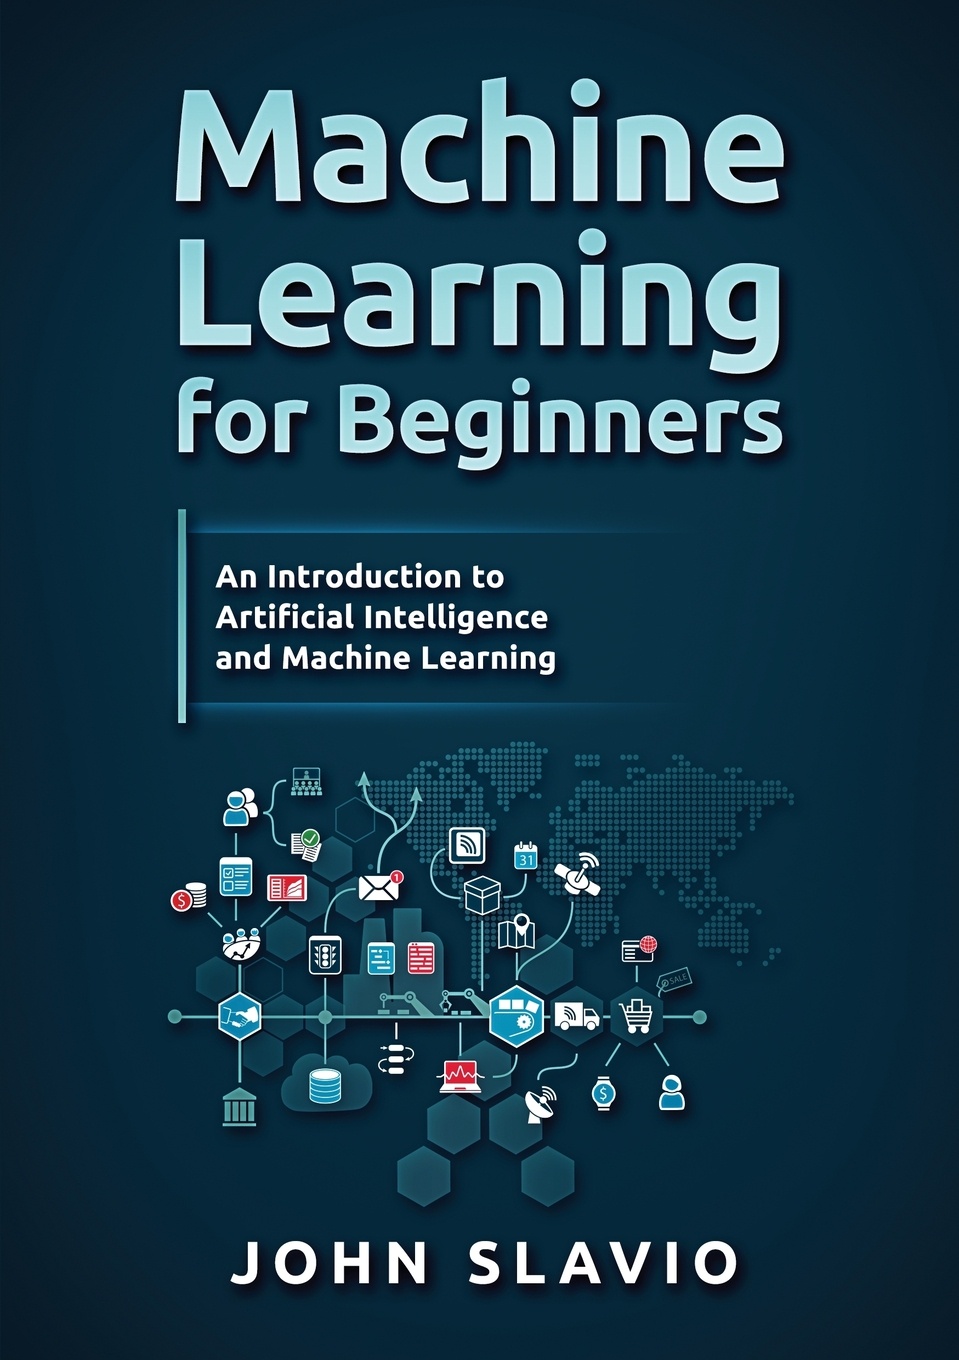 Machine Learning for Beginners. An Introduction to Artificial Intelligence and Machine Learning